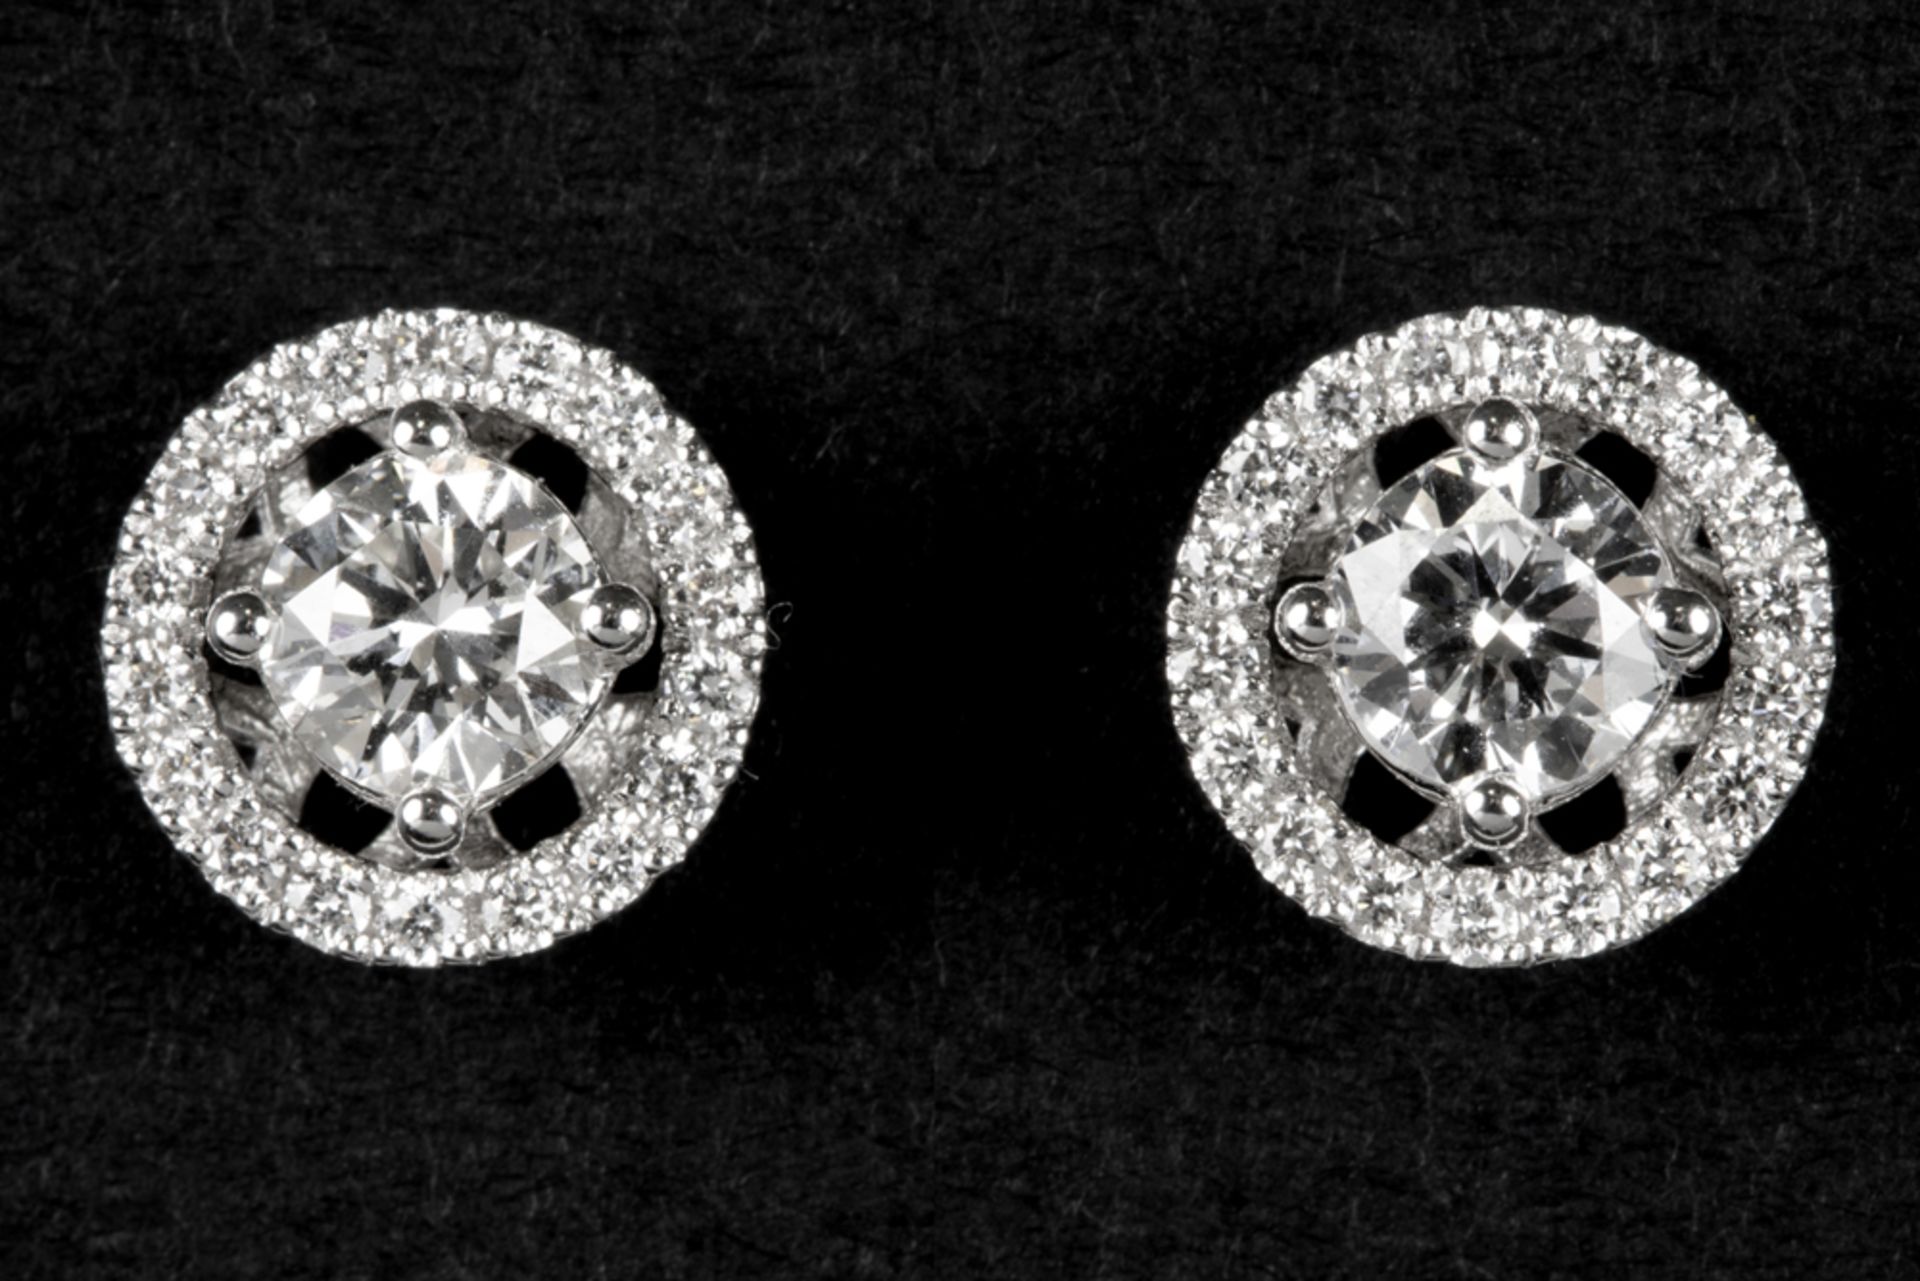 pair of earrings in white gold (18 carat) each with a bigger diamond surrounded by small ones - in